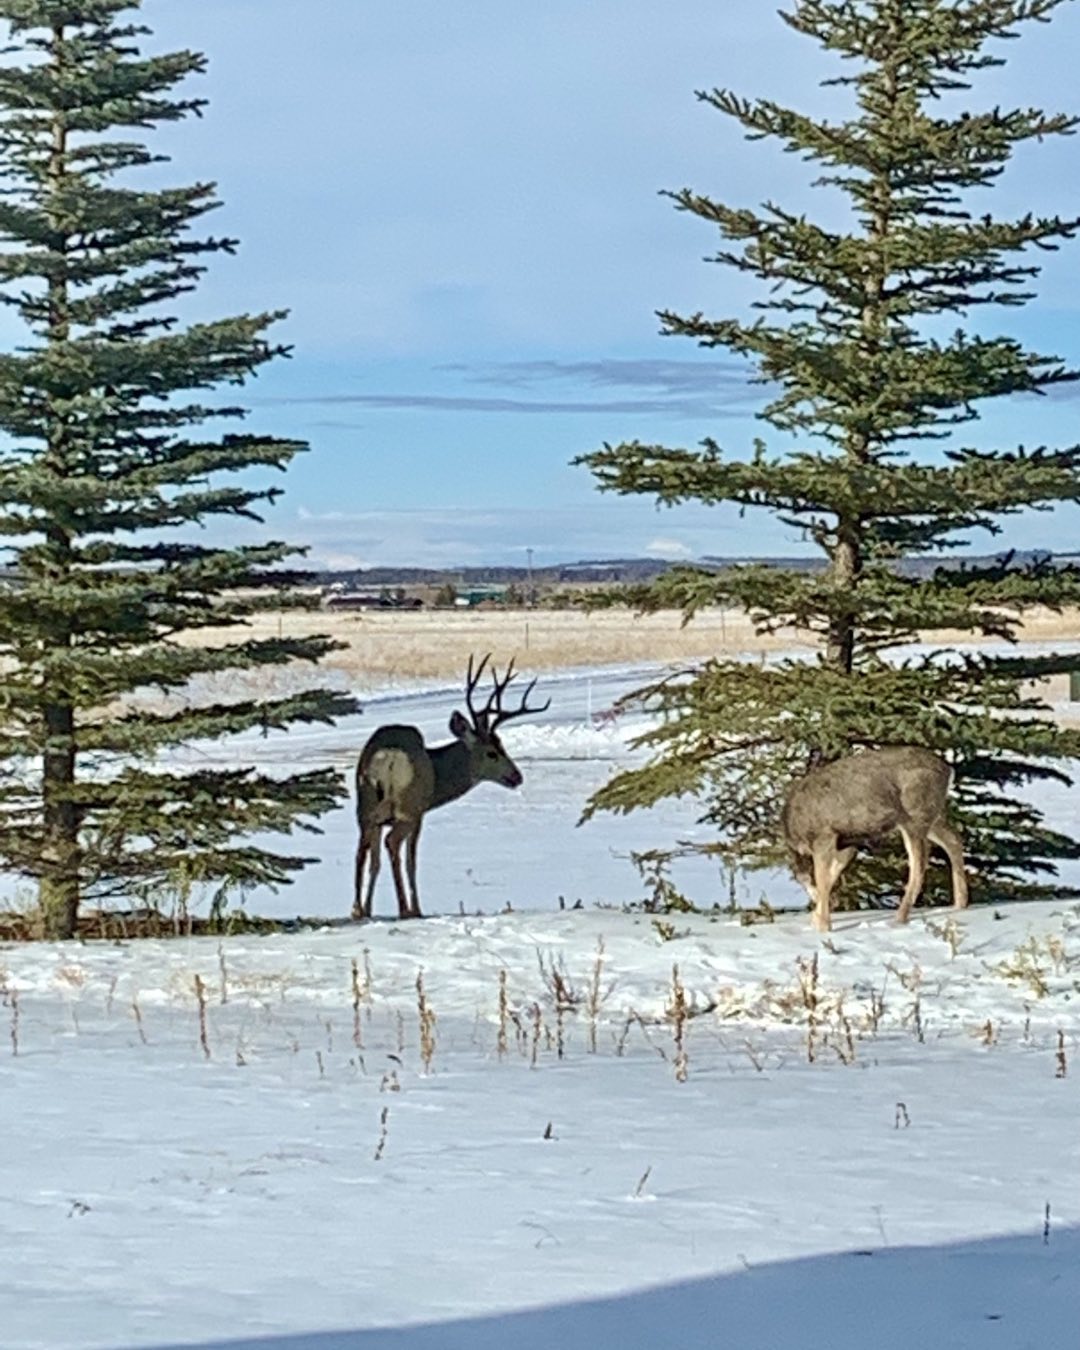 View from our kitchen window in Driggs, Idaho, during the year-end holidays. Maybe Santa is using mule deer this year! #driggsidaho #bestofthegemstate #muledeer #orcuttphotography #tetonvallyidaho